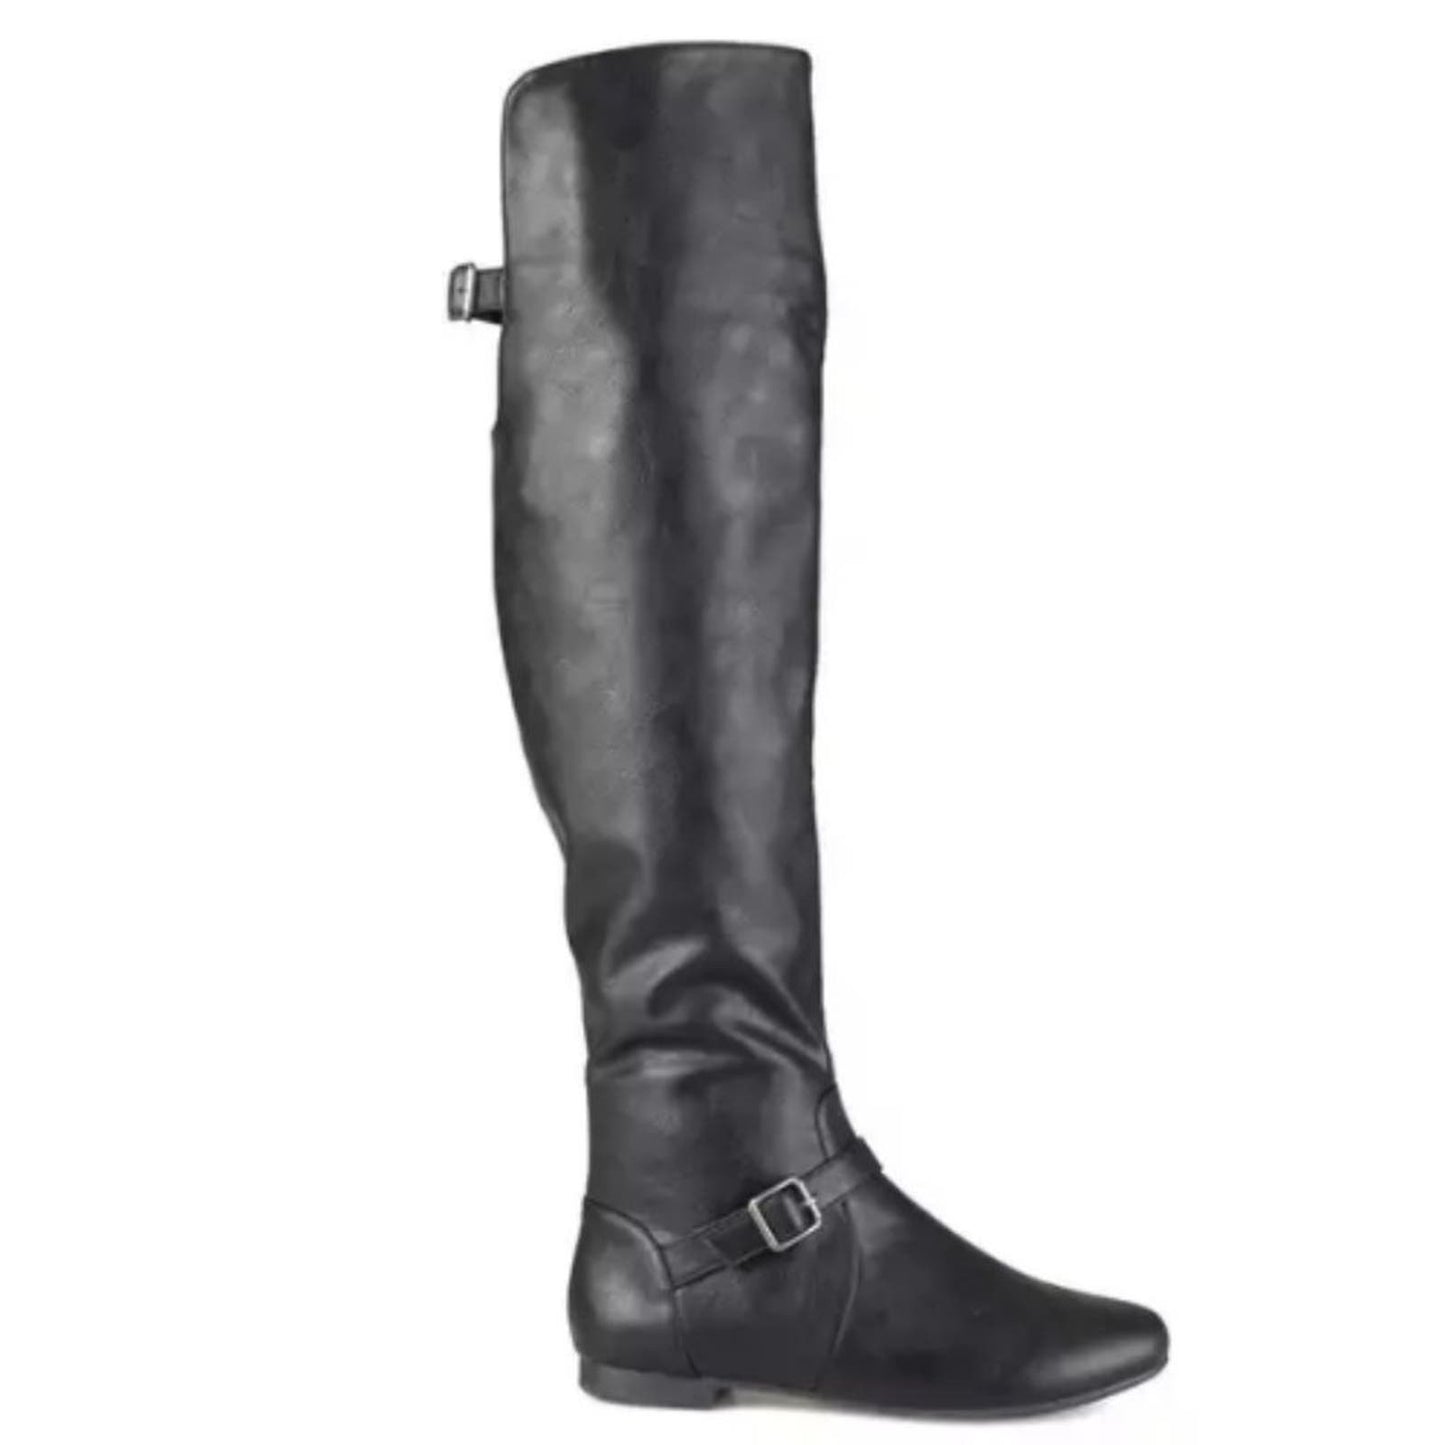 C.C. Collection Loft Over-The-Knee Boots in Black NEW Size 10